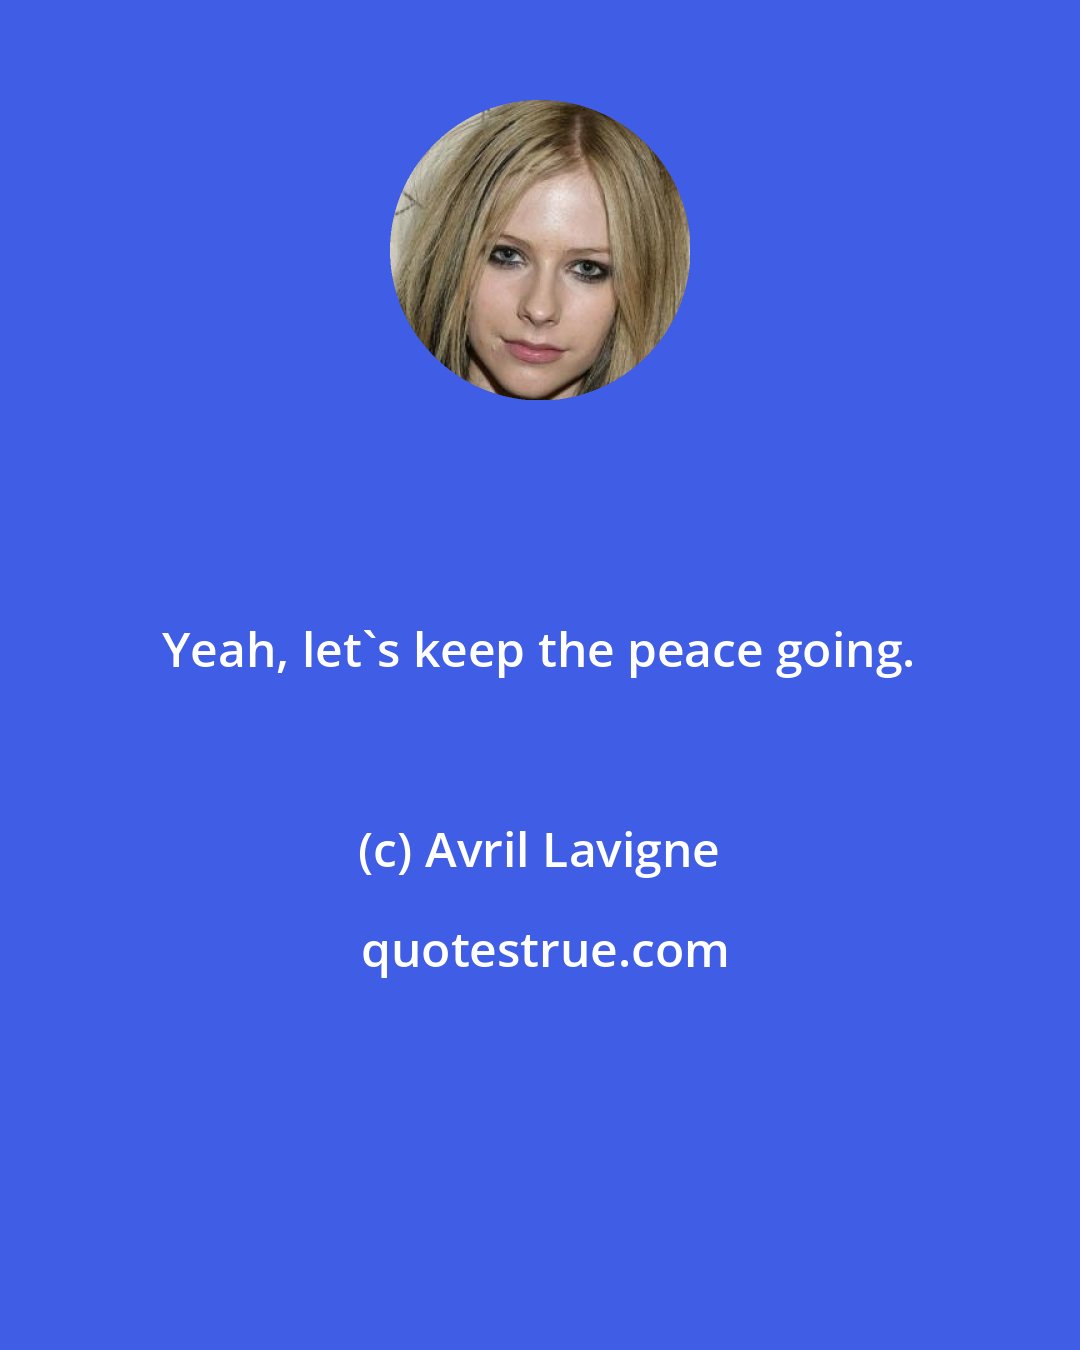 Avril Lavigne: Yeah, let's keep the peace going.